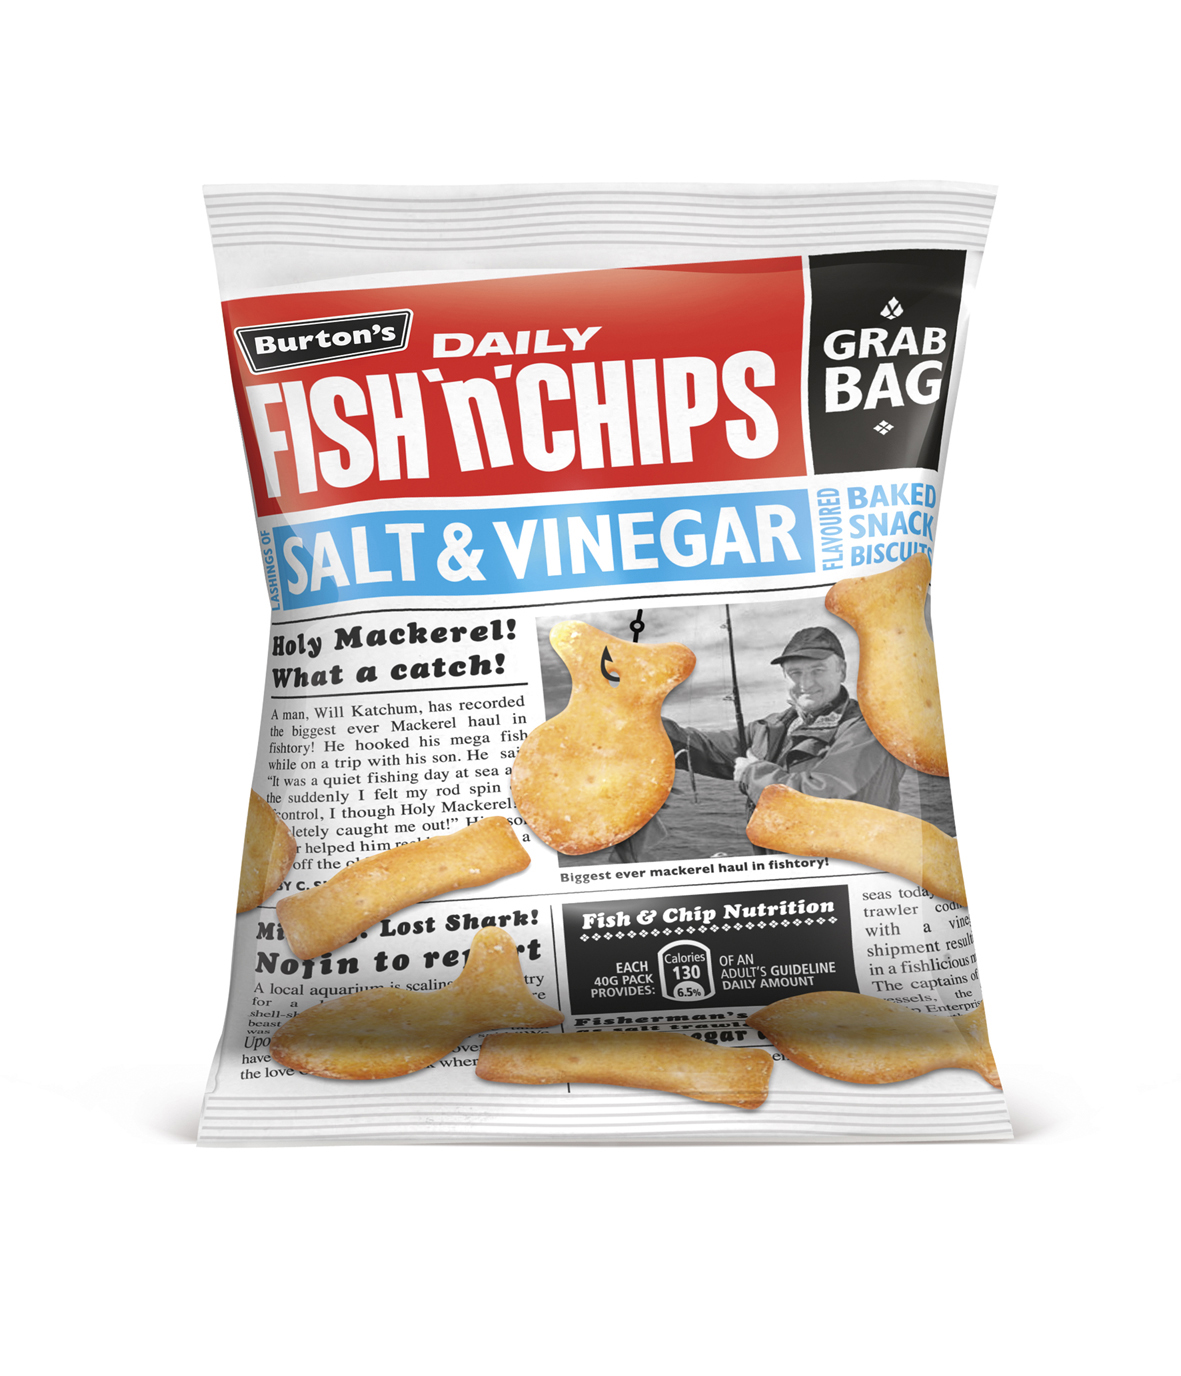 Burton’s Fish ‘n’ Chips come in multipacks of five 25g bags, 125g bags (both with an RRP of €2.49) and 40g packs (RRP €0.99)